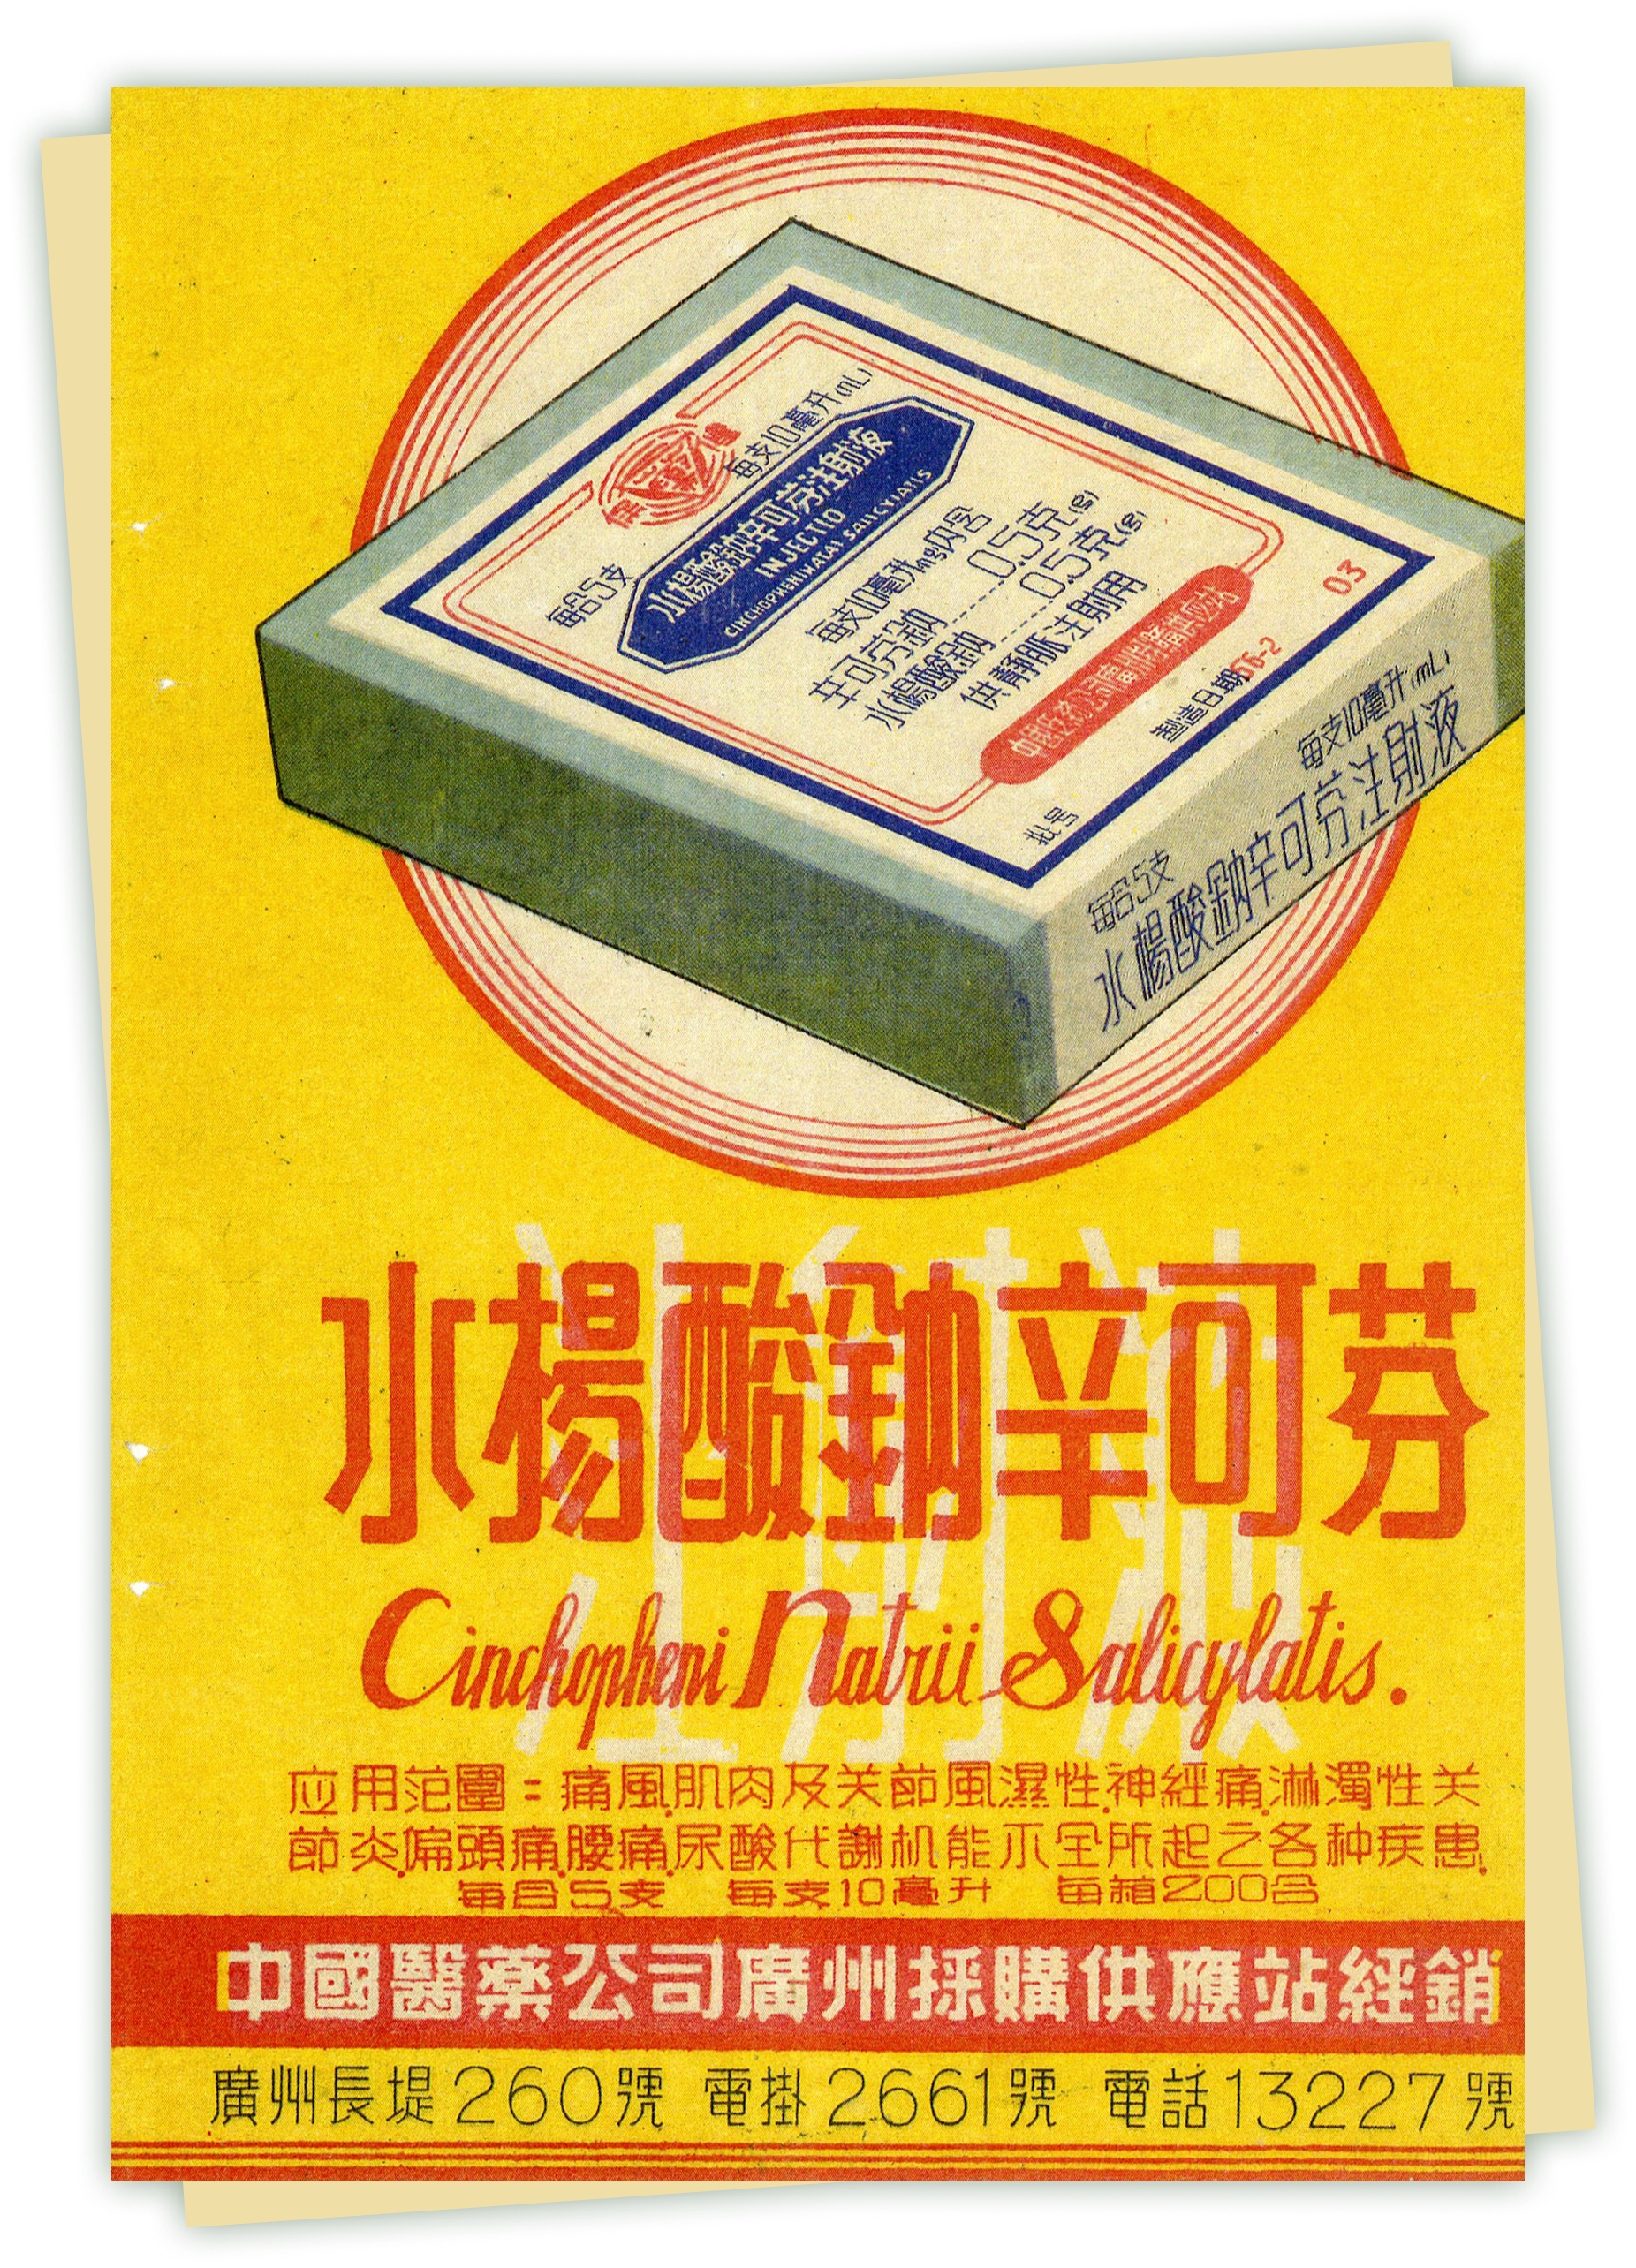 A color illustration that shows a box of a Chinese brand of aspirin, with text below